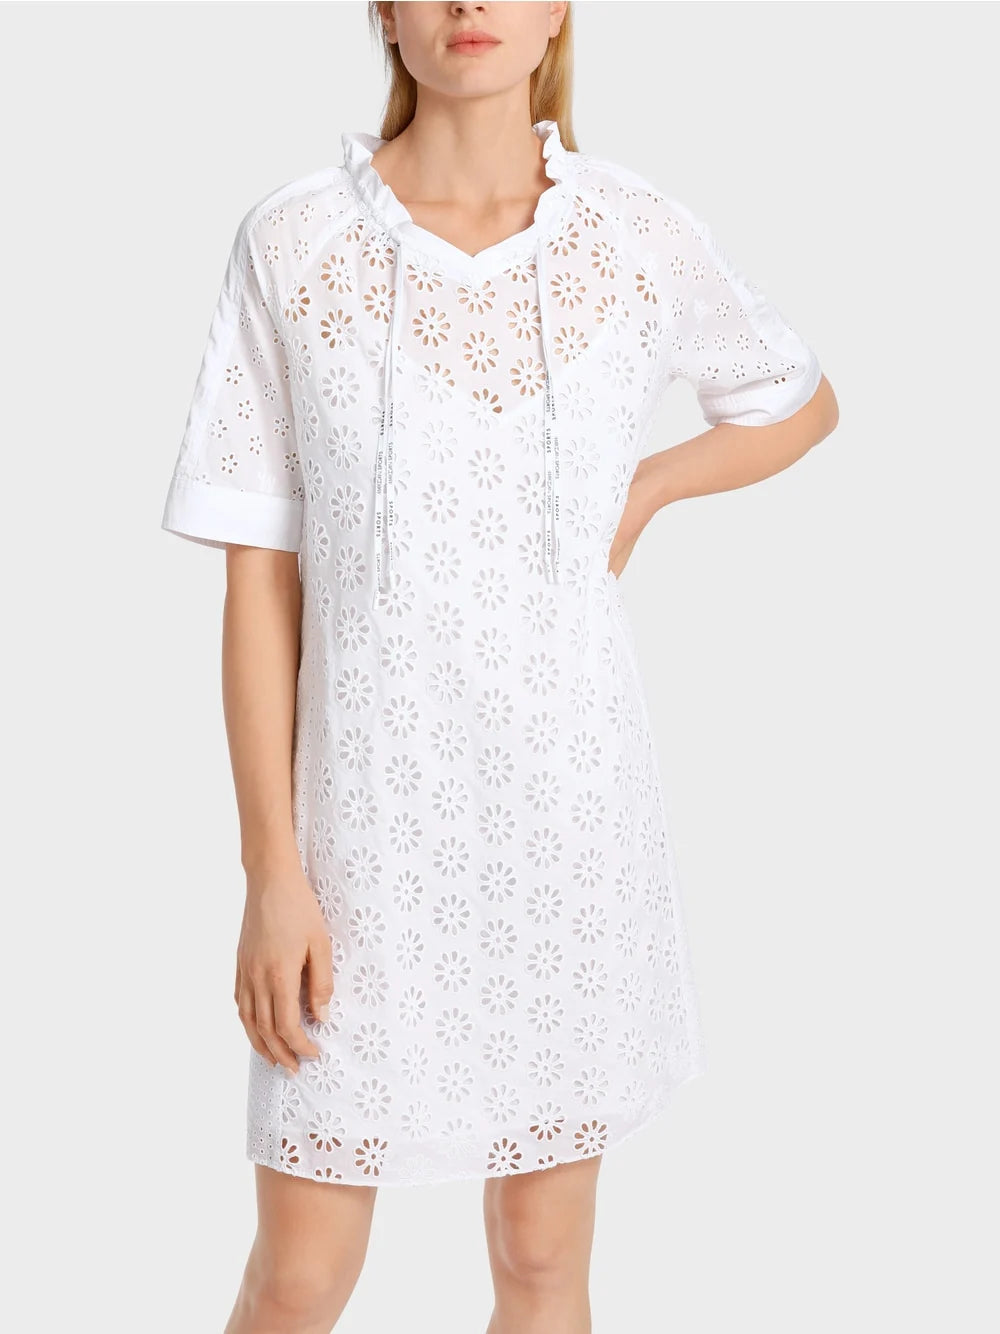 Marc Cain White Dress with eyelet embroidery